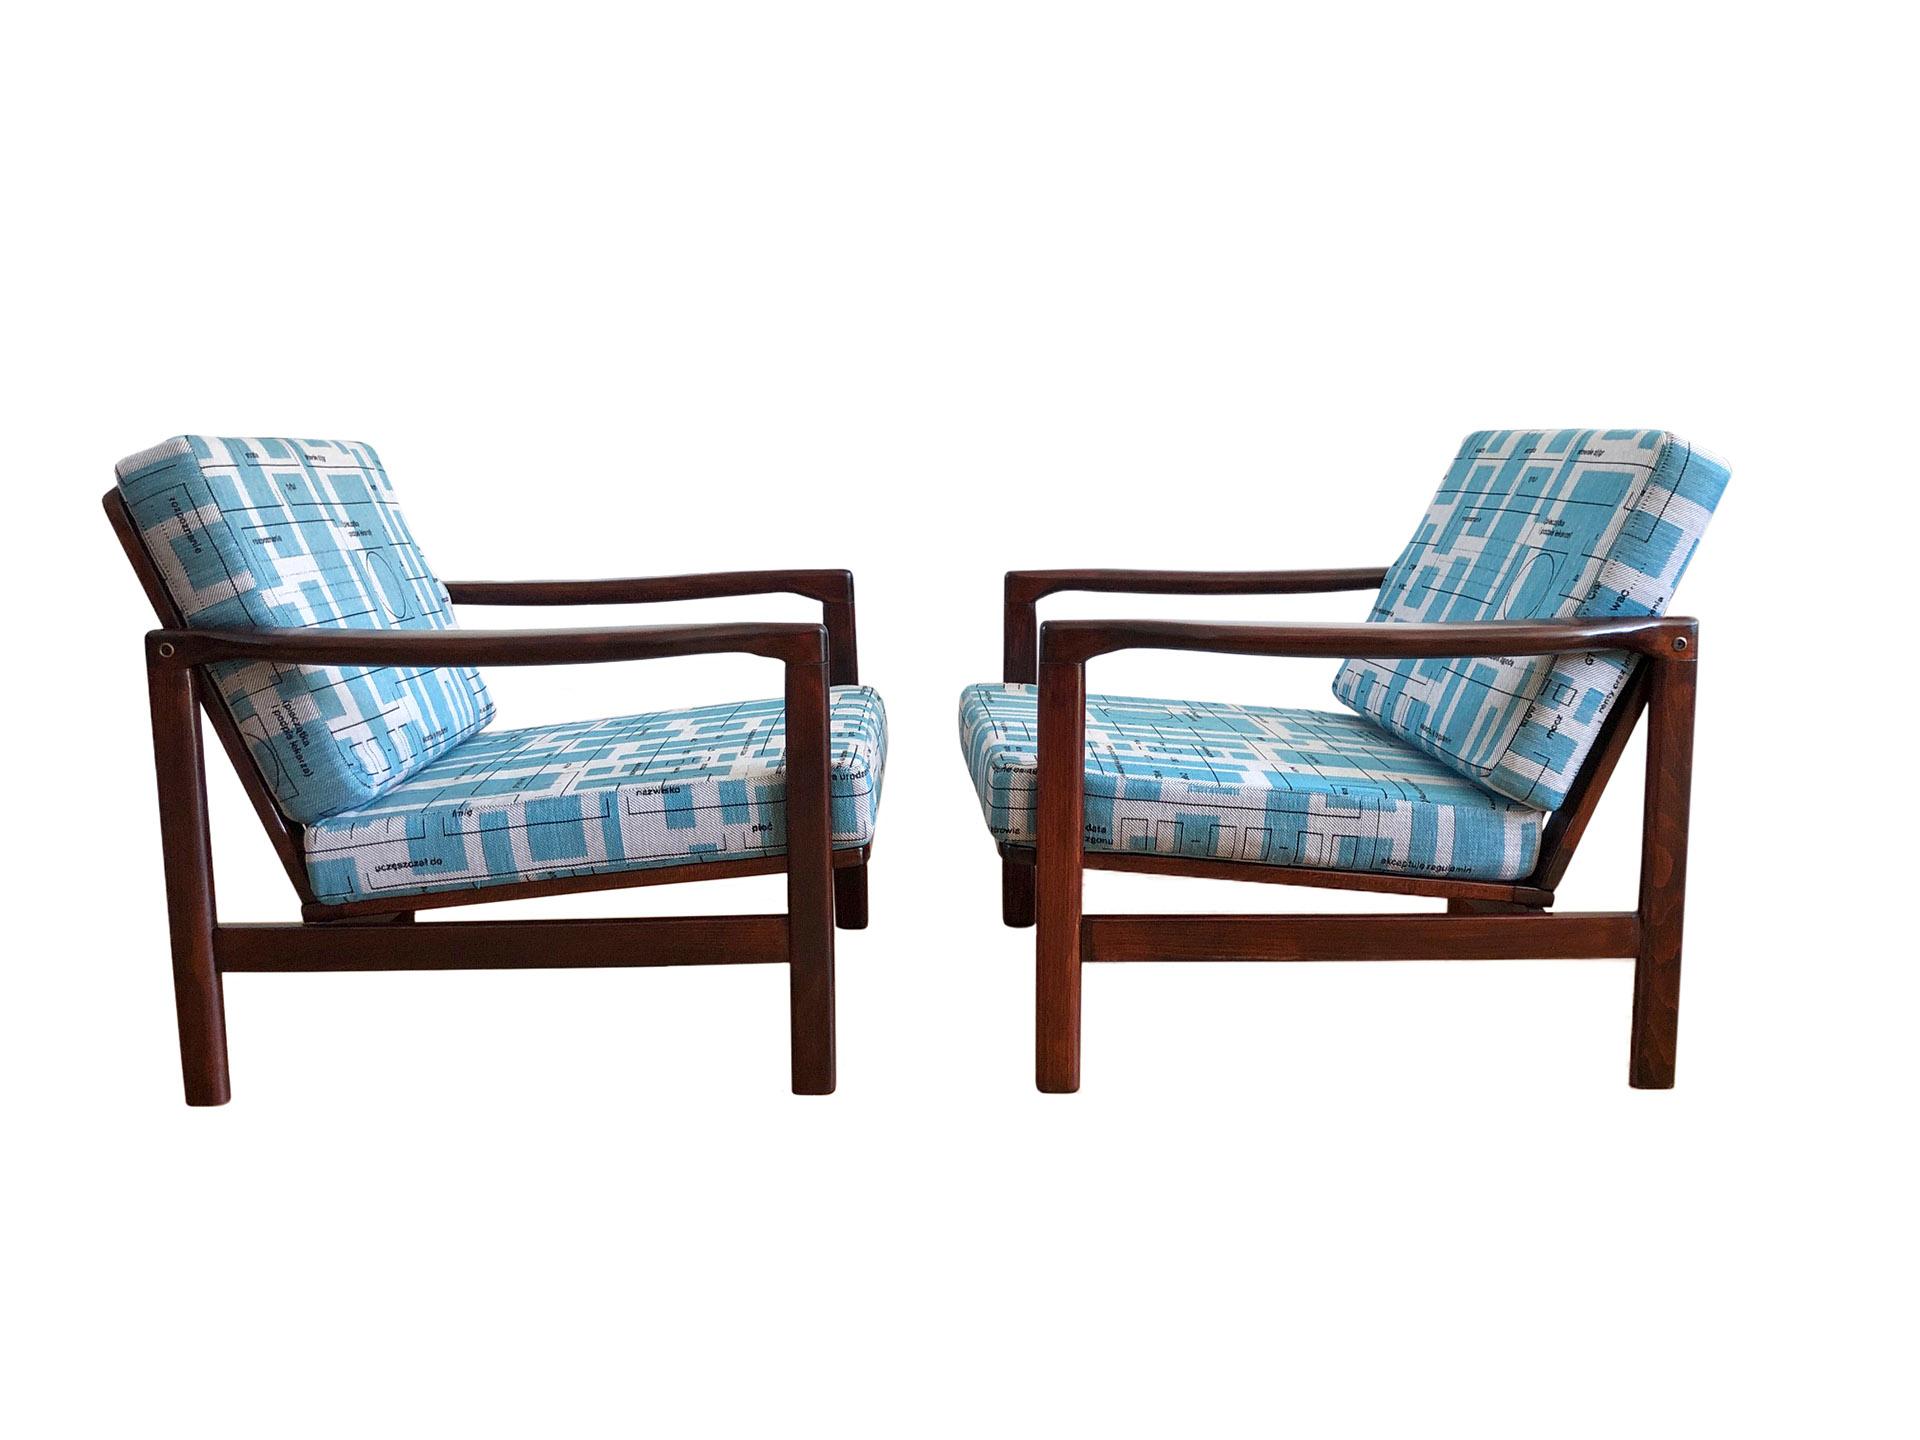 Pair of Blue Jacquard Mid-Century Armchairs by Zenon Bączyk, 1960s For Sale 3